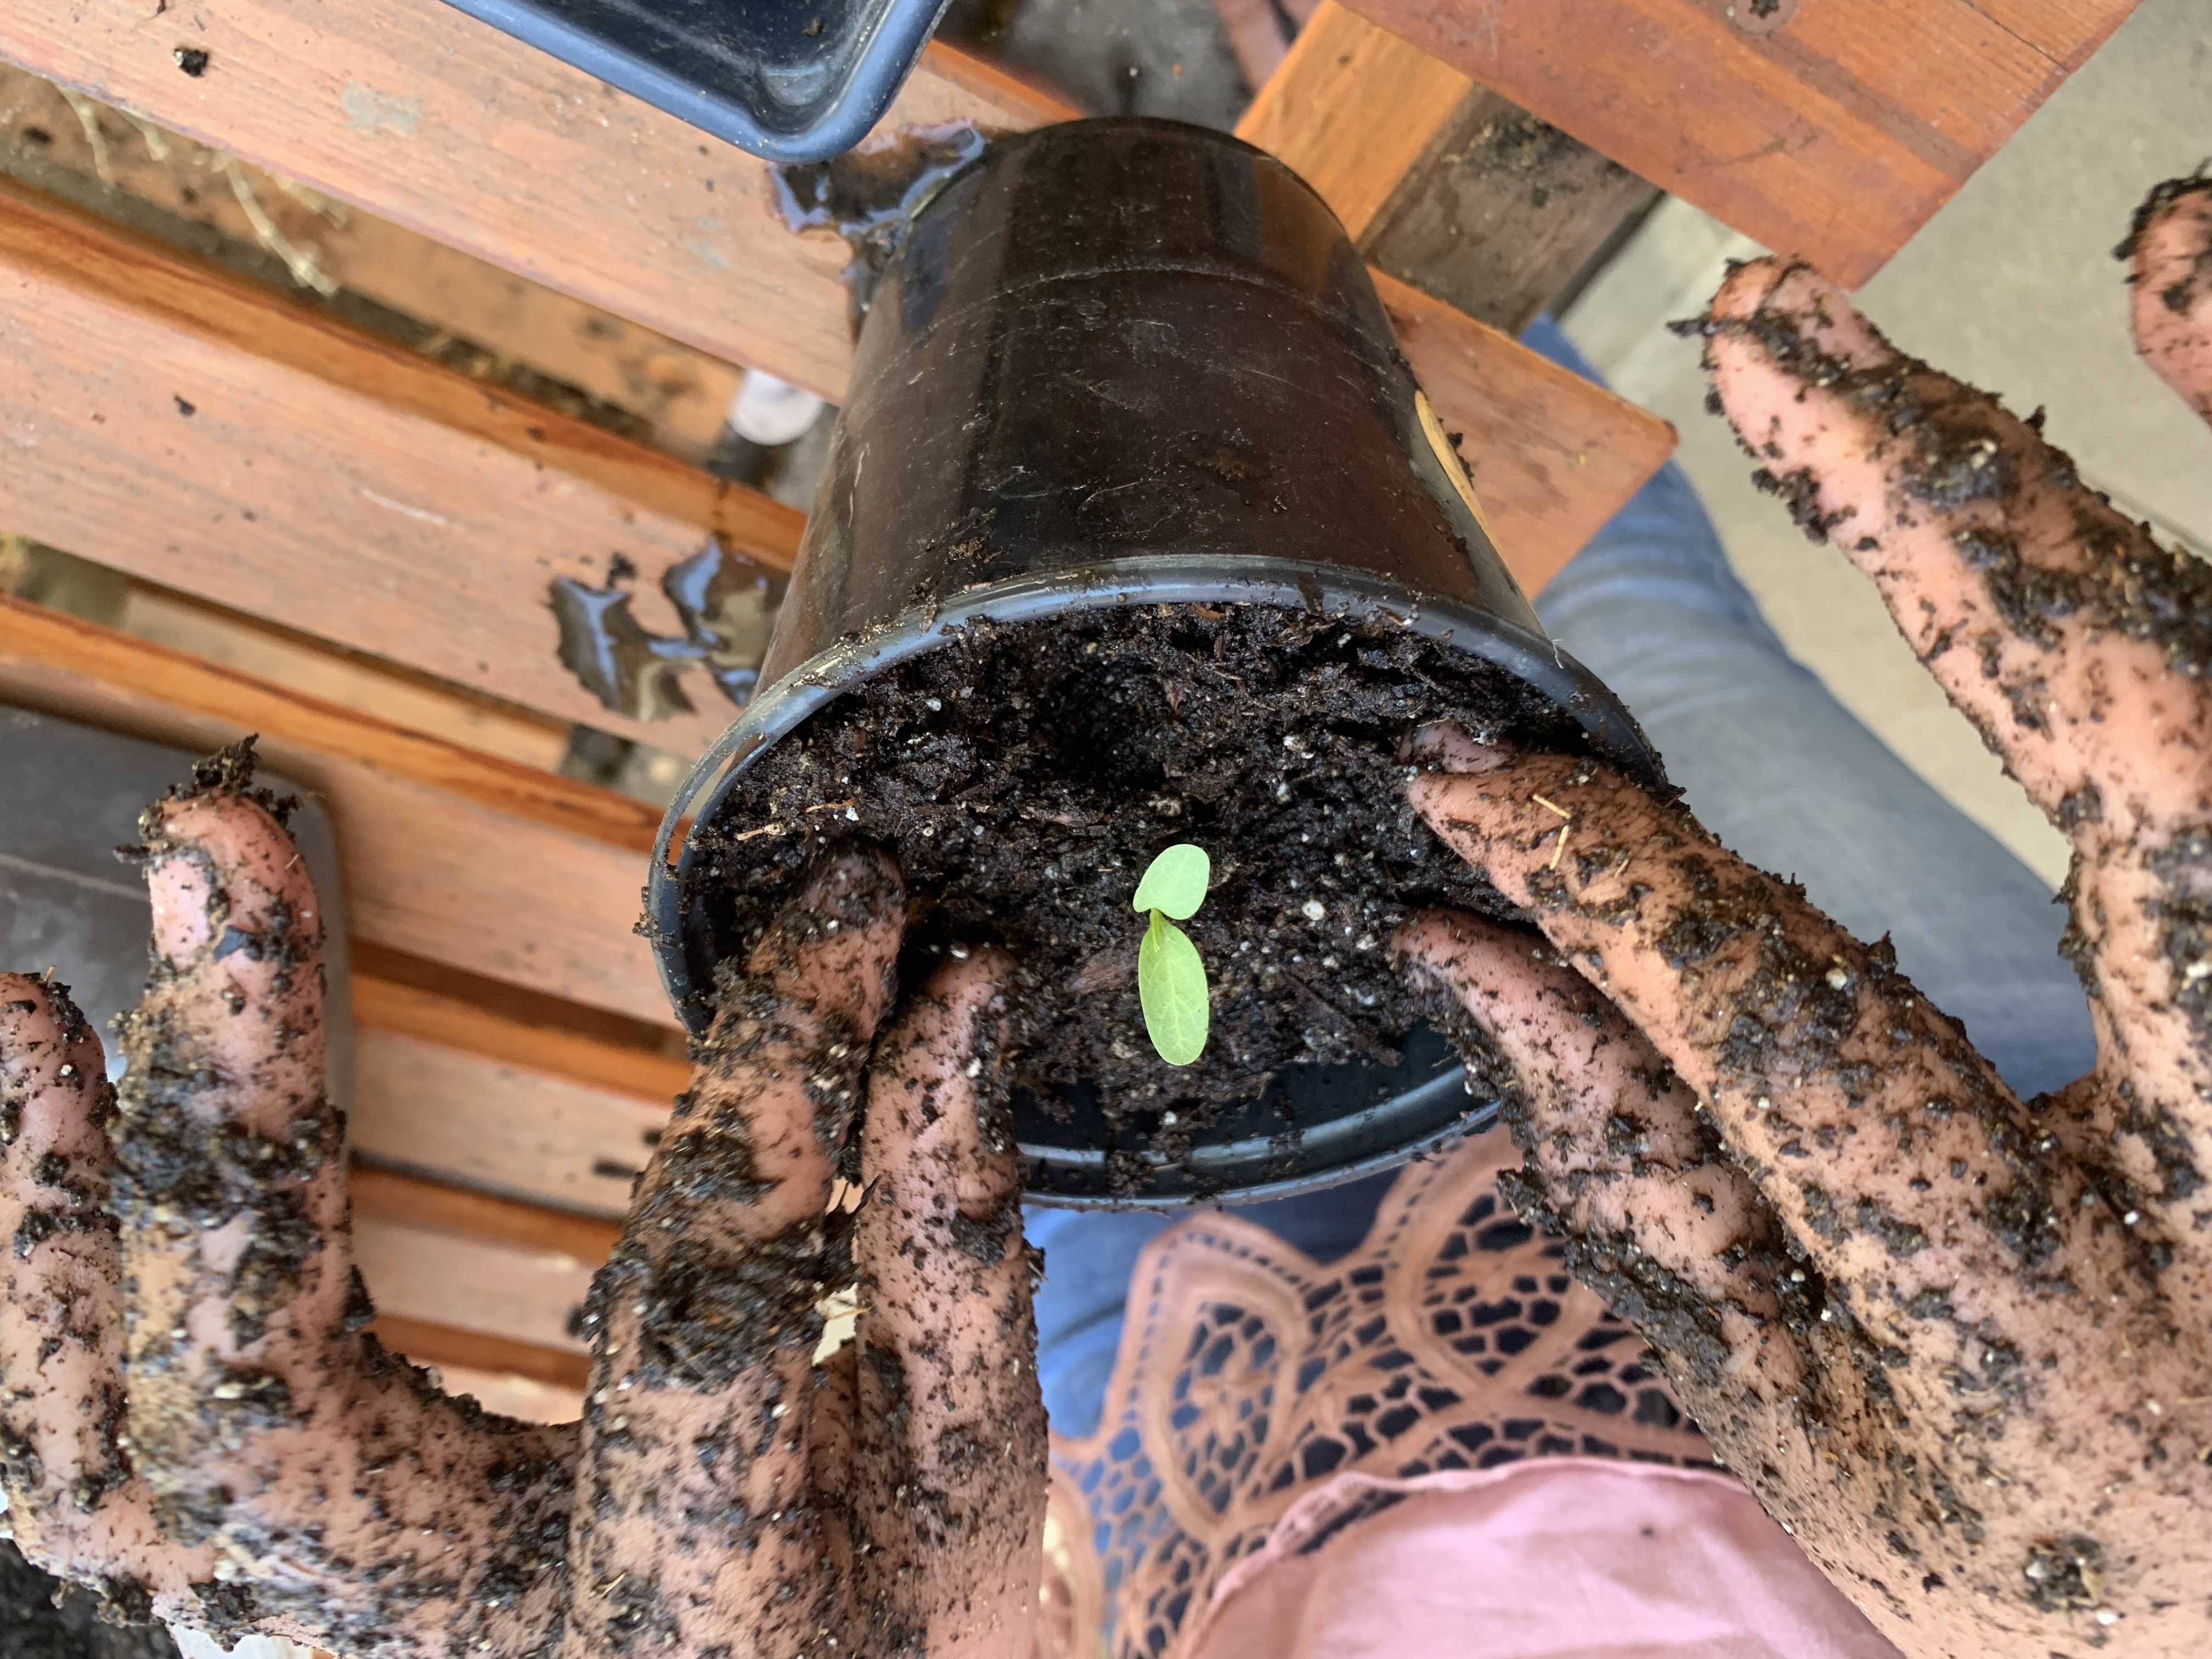 tiny sprout in a pot